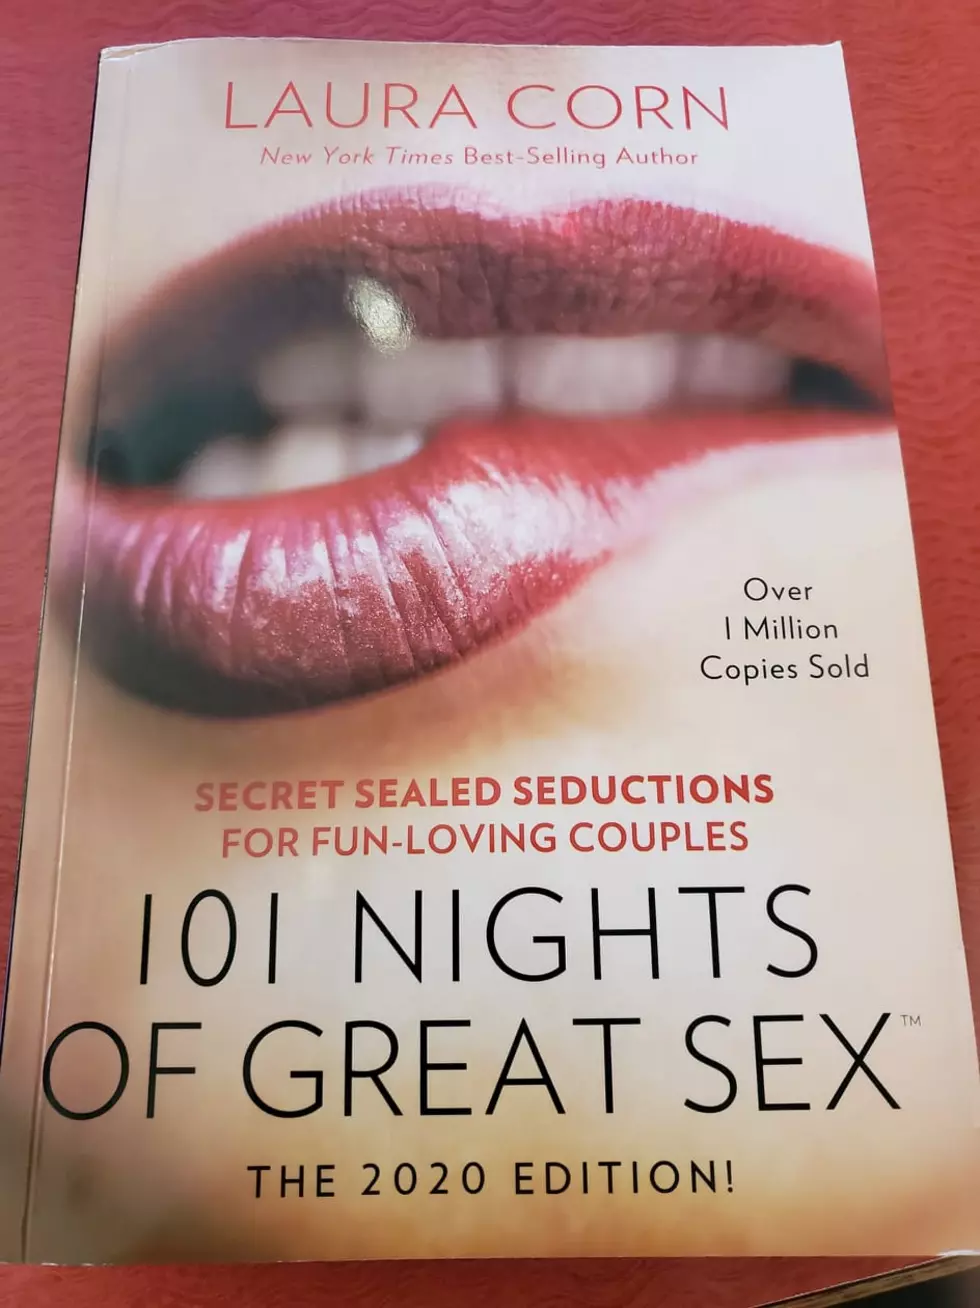 101 Nights of Great Sex is the Perfect Addition for Valentine’s